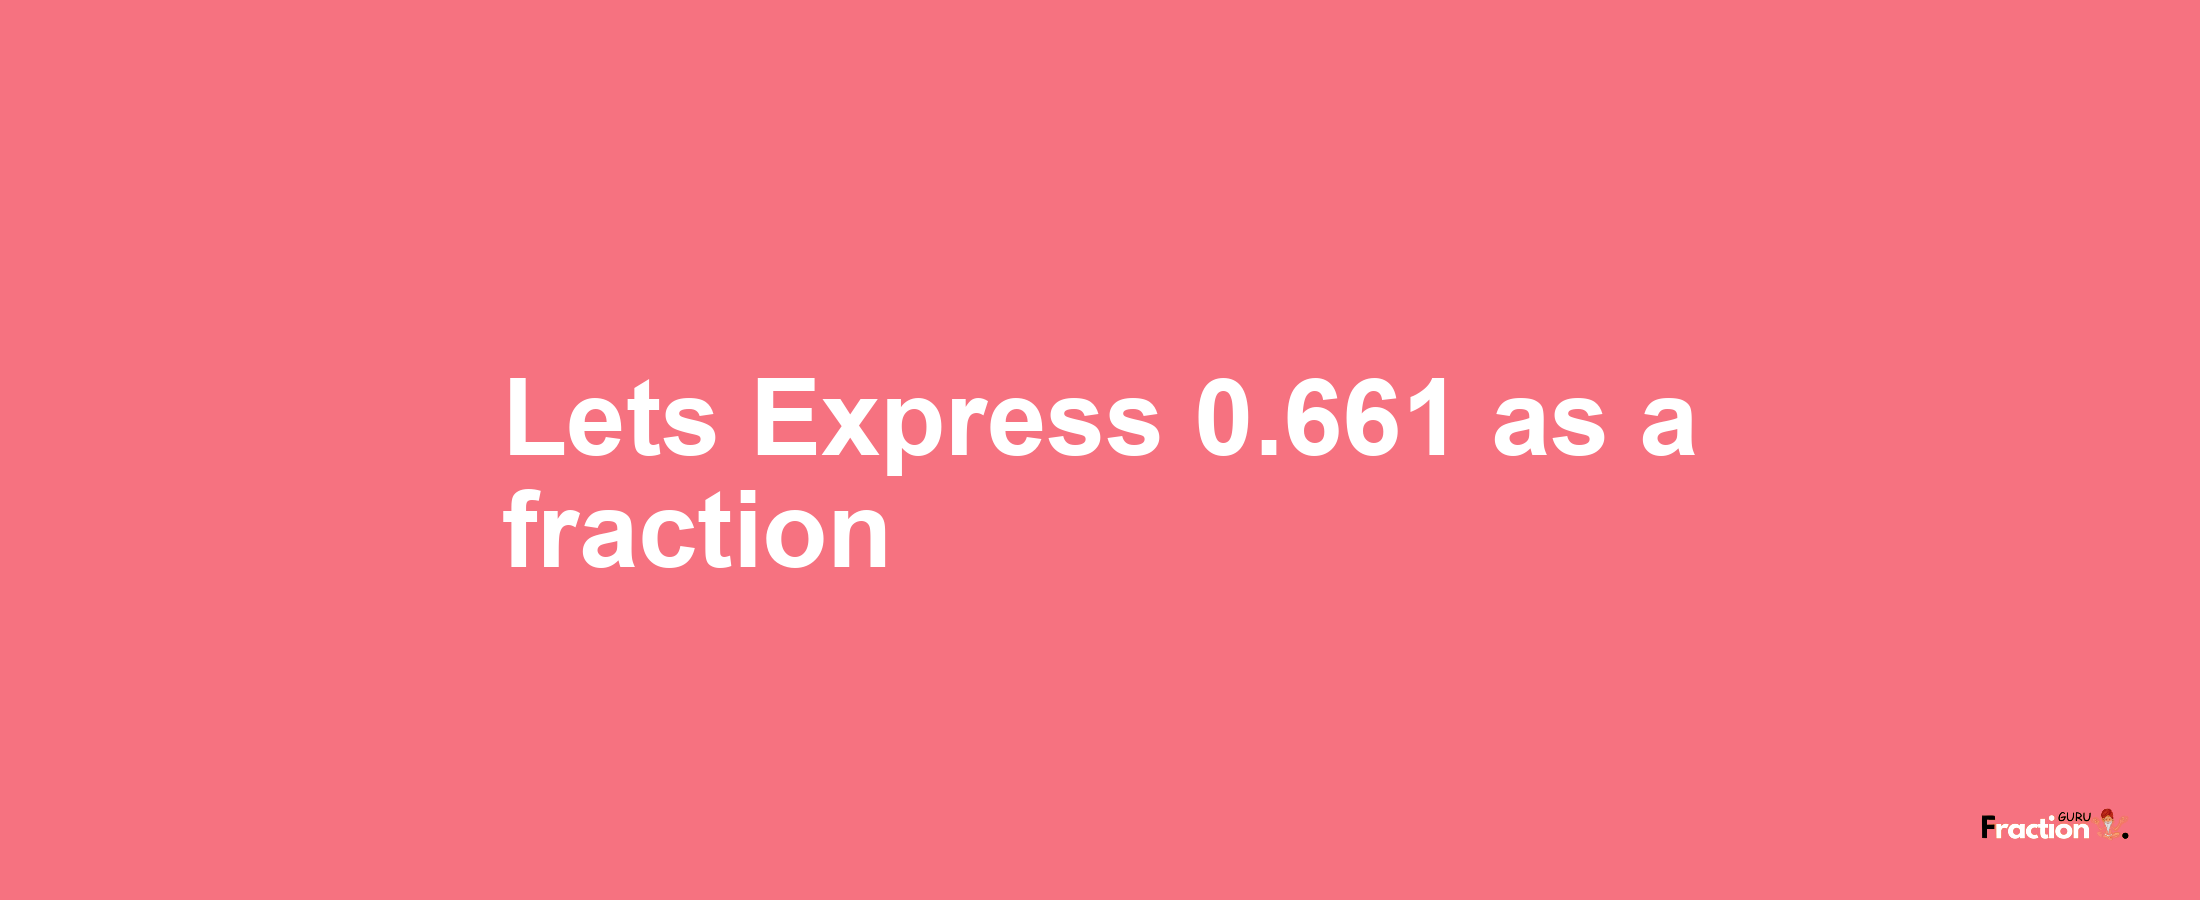 Lets Express 0.661 as afraction